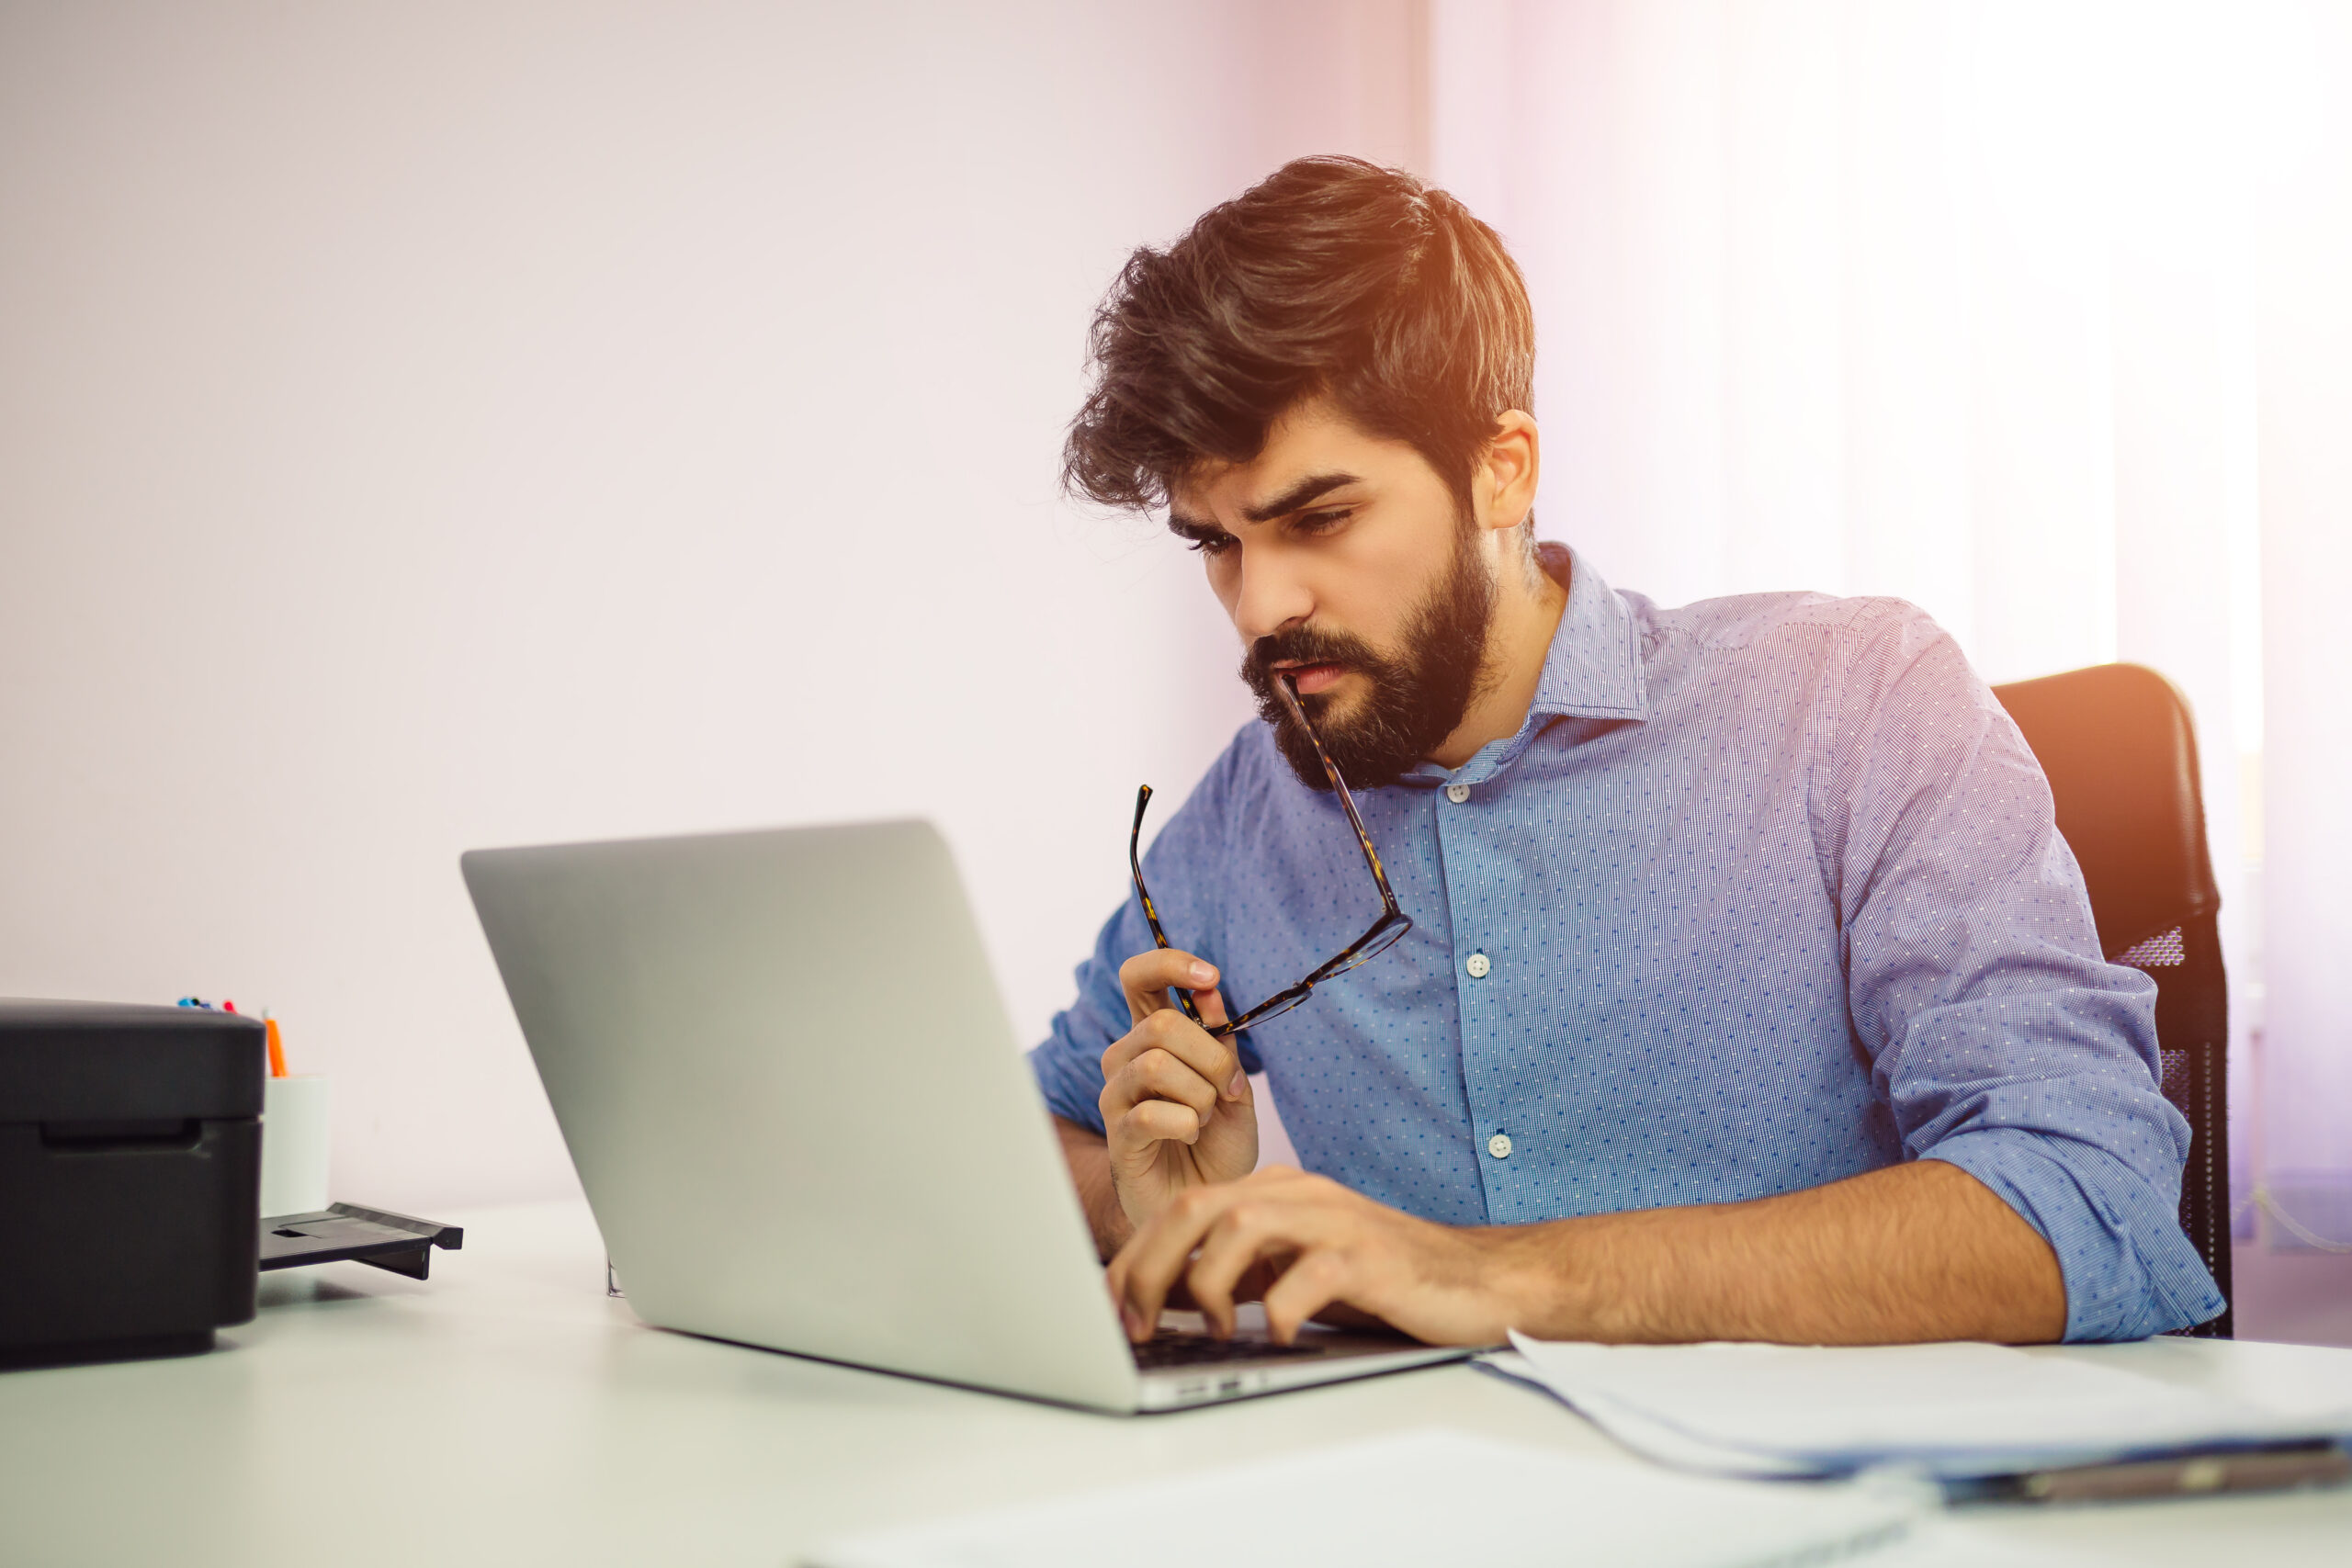 Concentrated man using laptop computer.